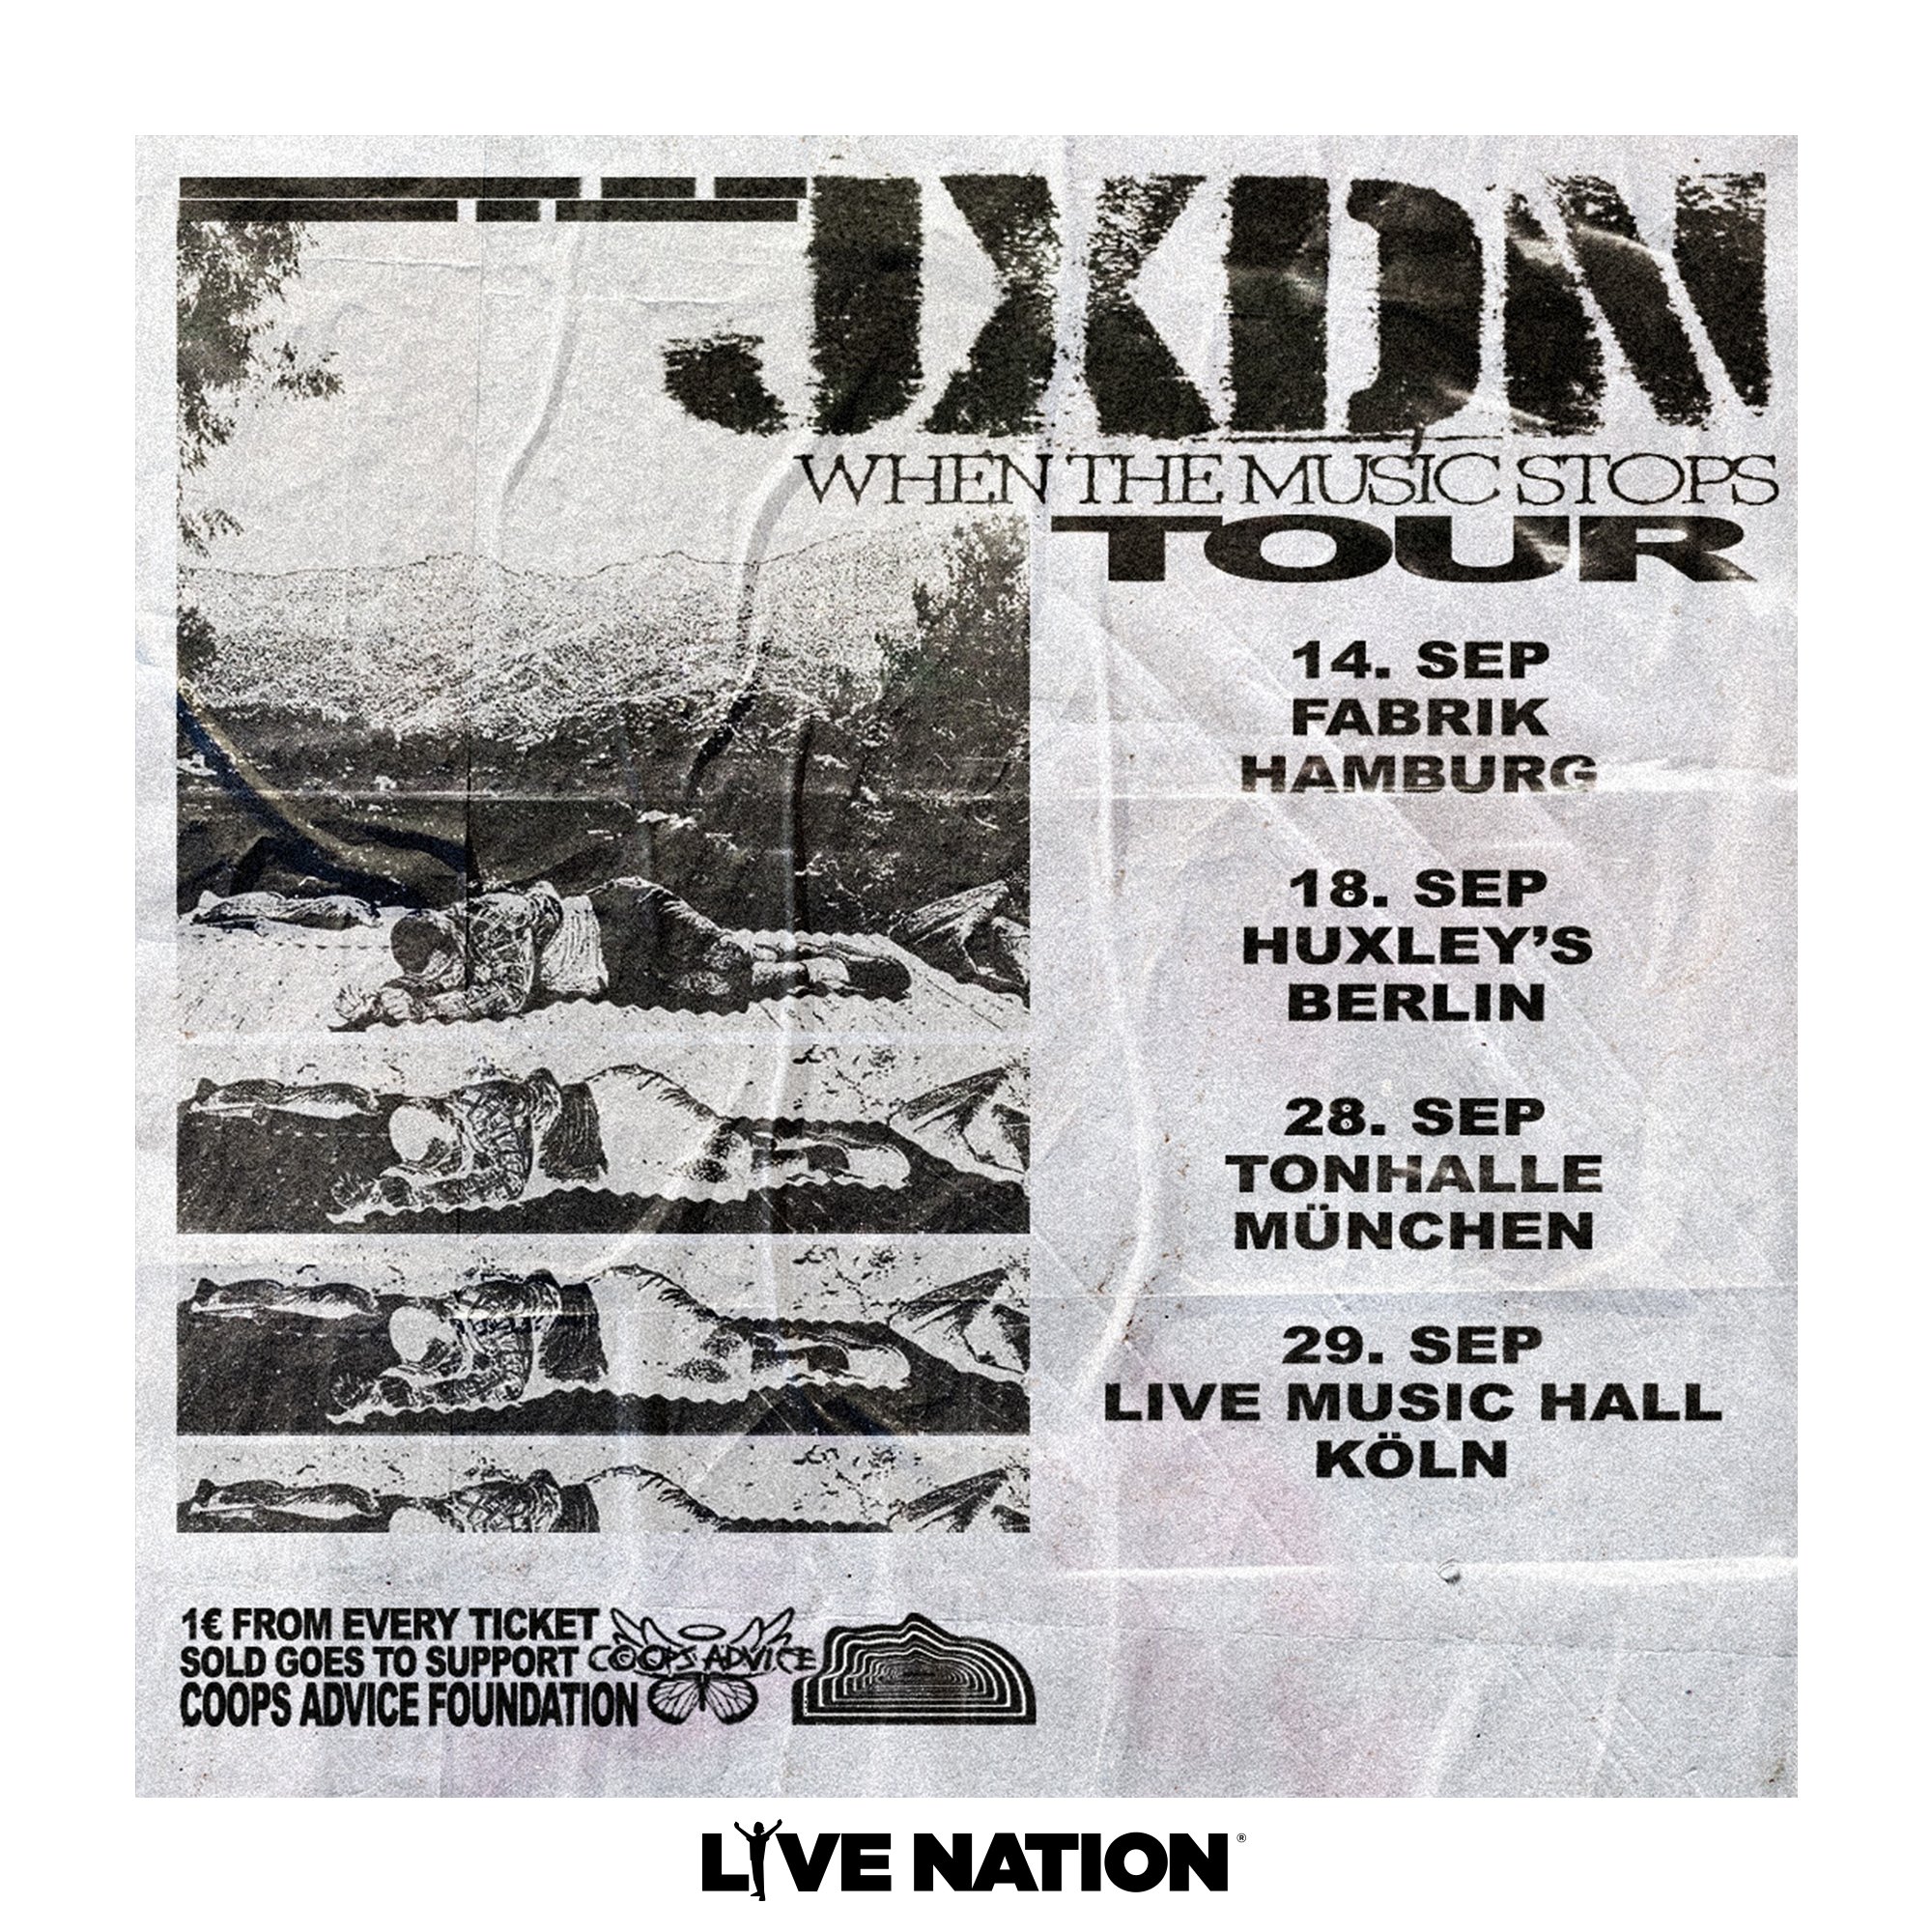 Jxdn - When The Music Stops Tour in der Live Music Hall Tickets